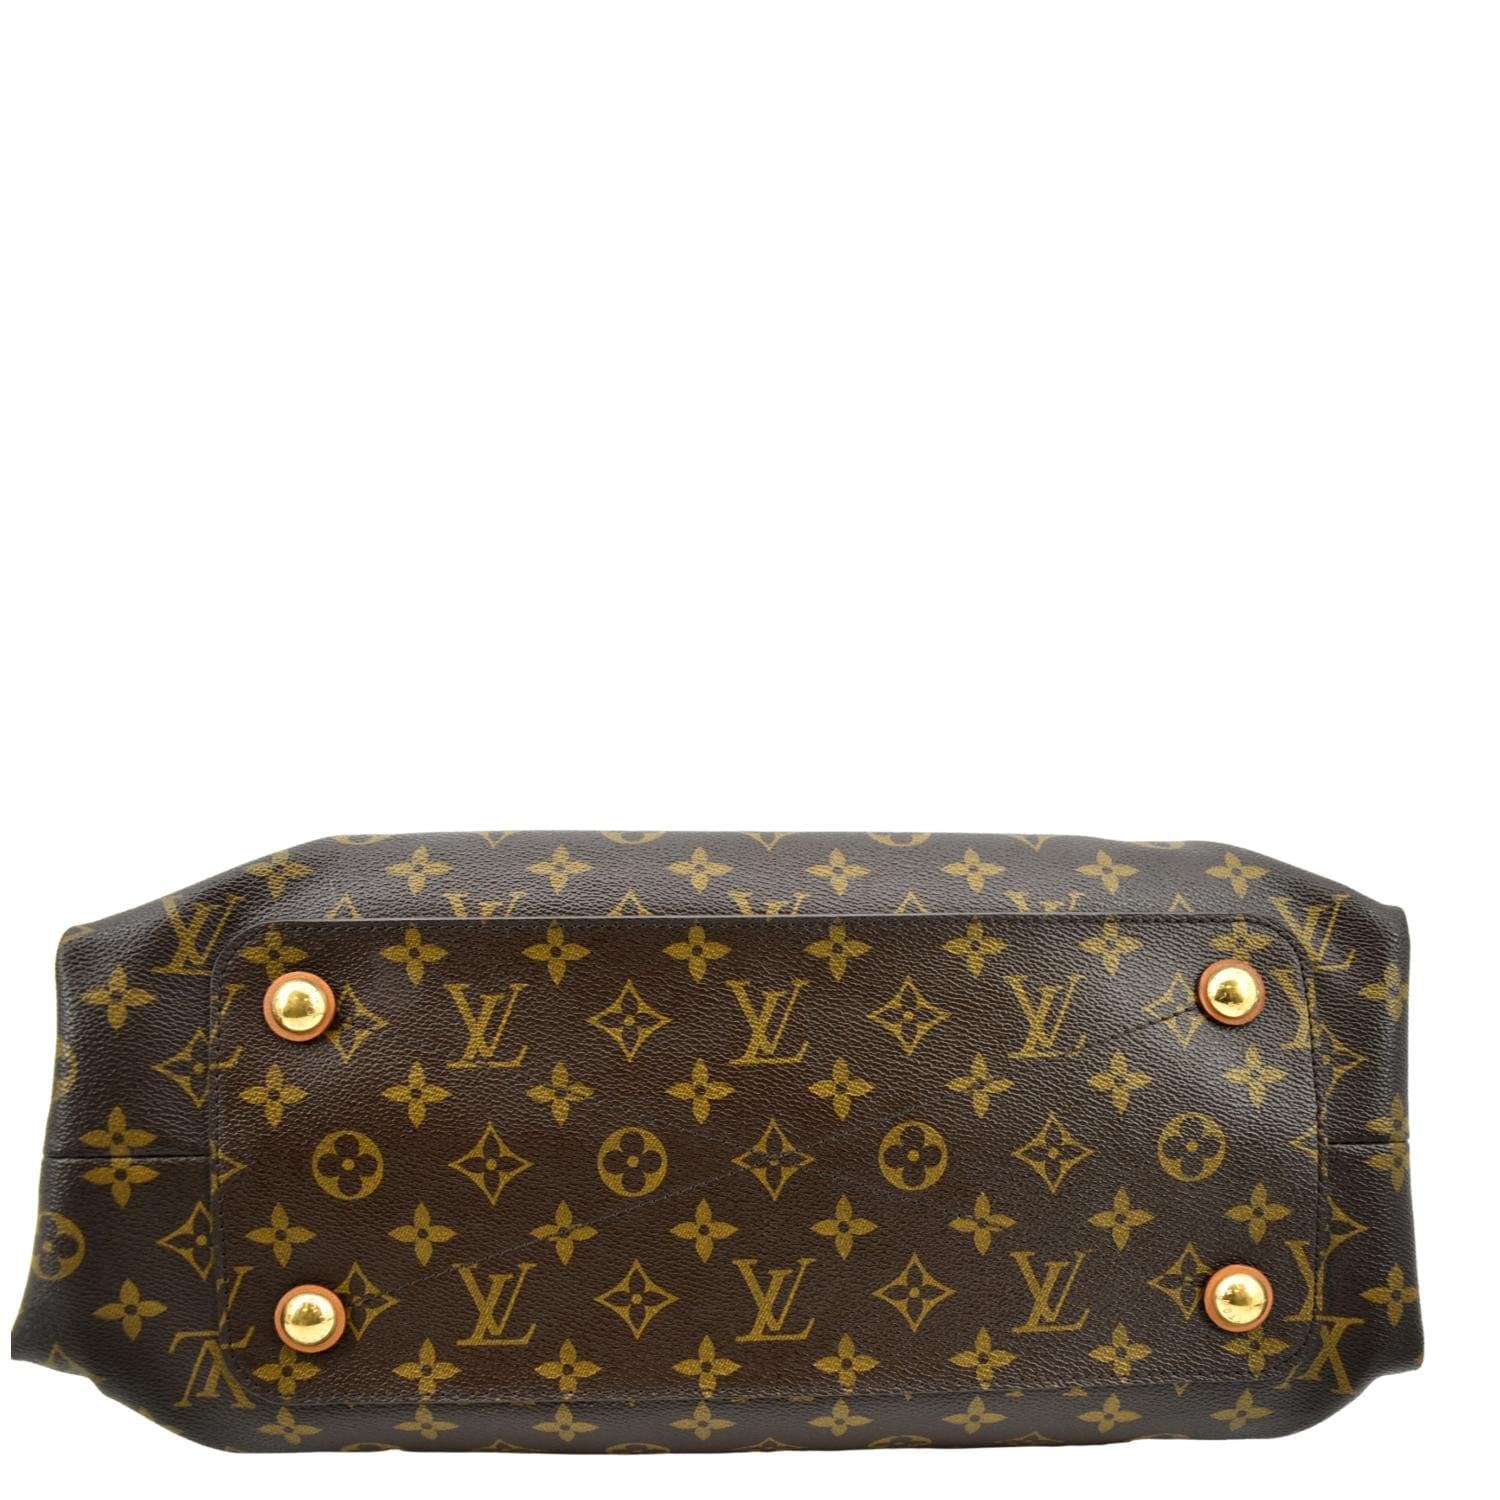 LOUIS VUITTON Olympe handbag M40580｜Product Code：2100300914149｜BRAND OFF  Online Store